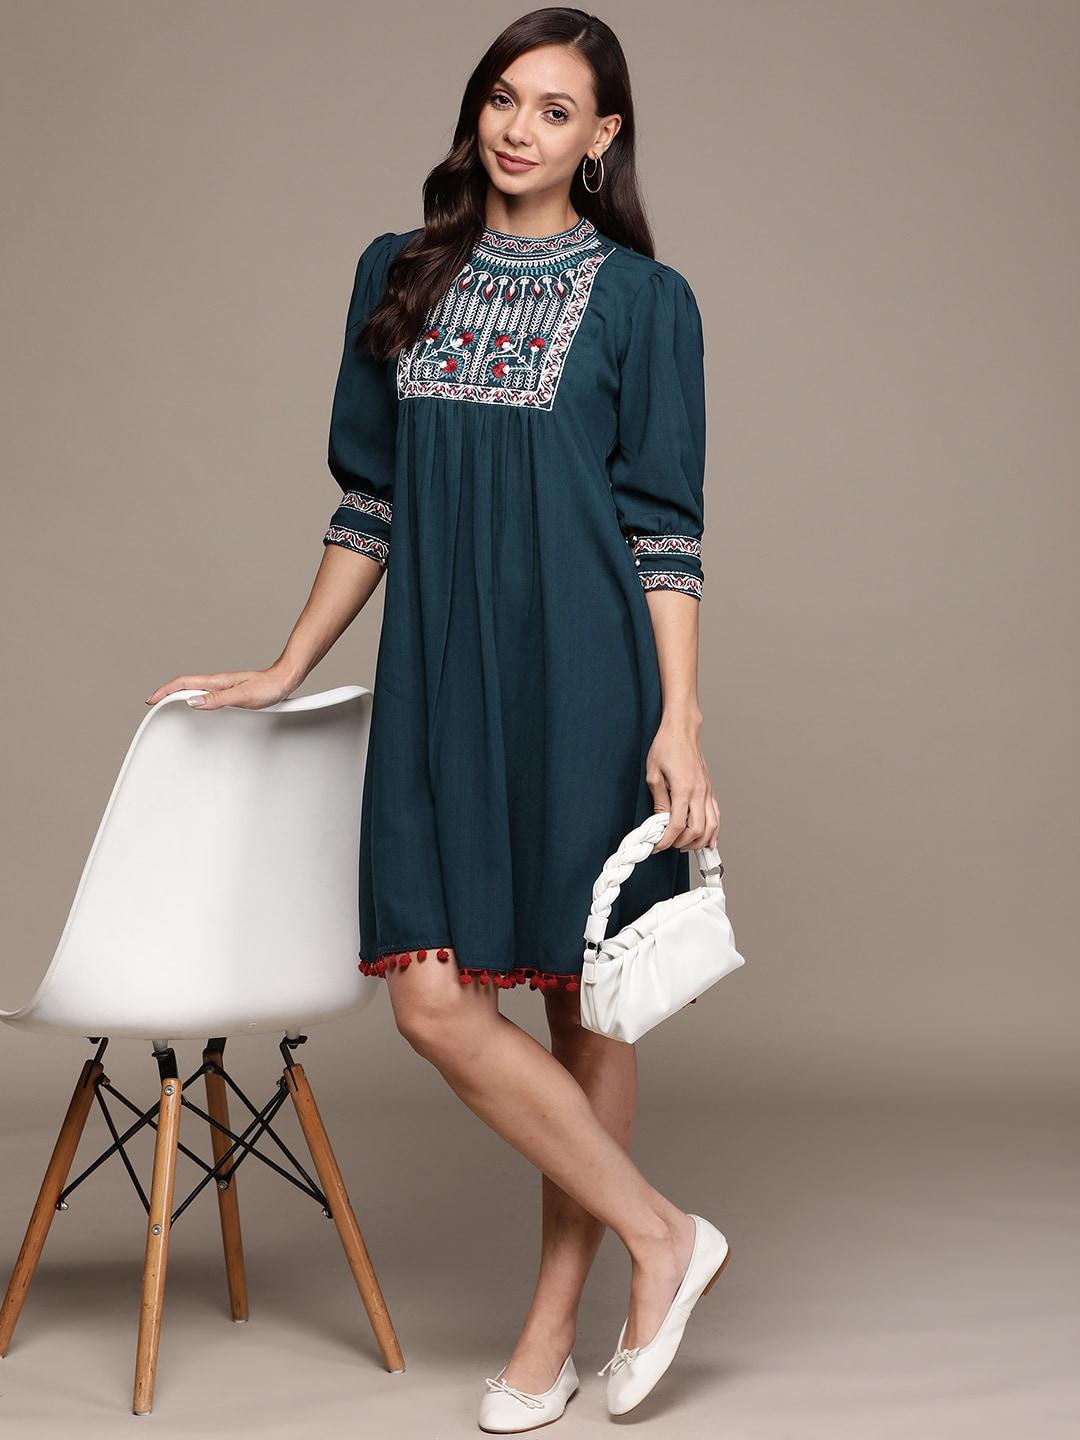 ishin-teal-blue-&-white-ethnic-motifs-embroidered-georgette-a-line-dress